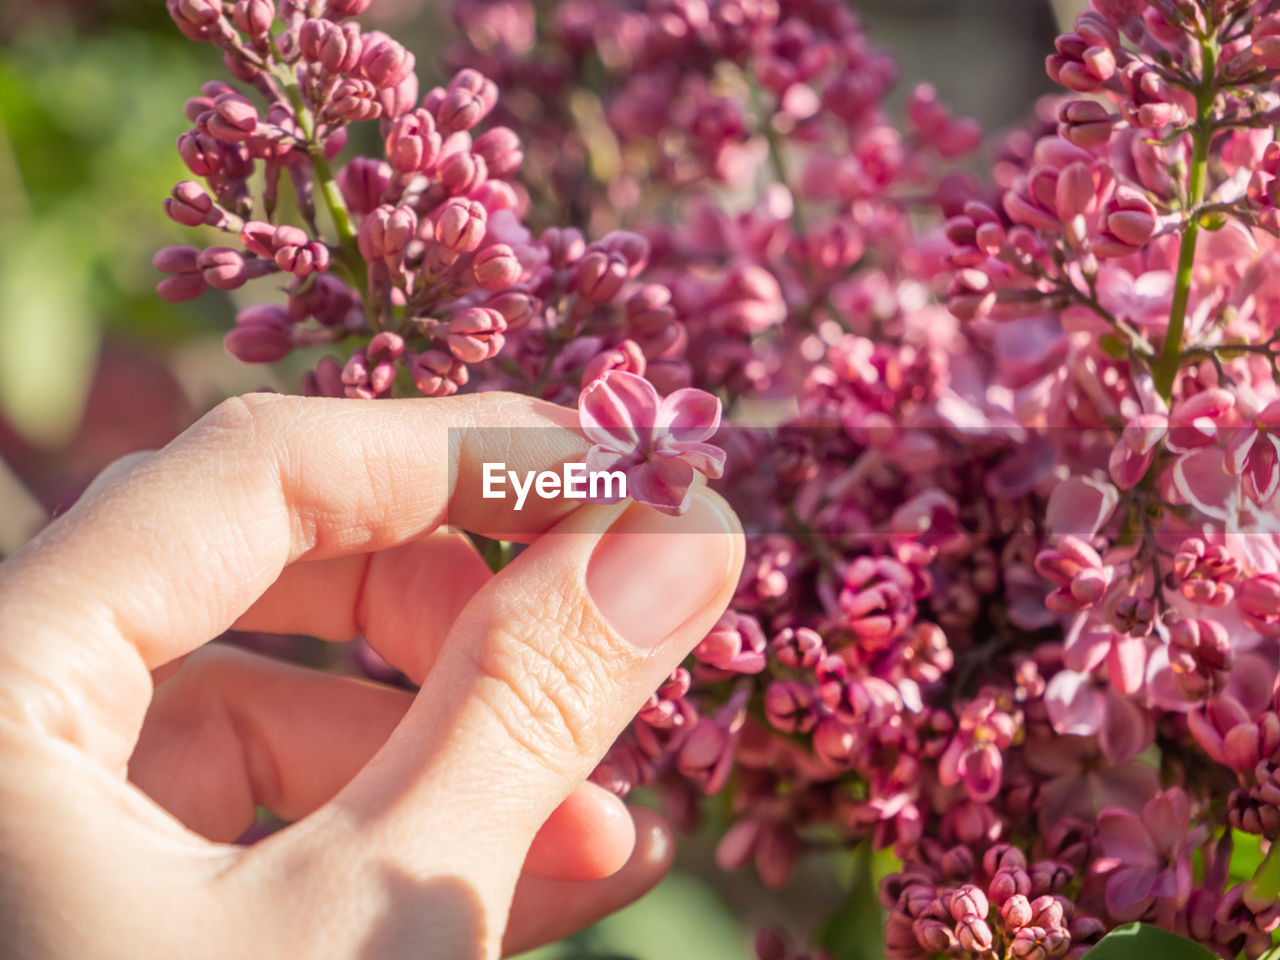 flower, plant, hand, flowering plant, pink, beauty in nature, freshness, nature, one person, lilac, blossom, close-up, fragility, holding, adult, women, lifestyles, petal, outdoors, shrub, growth, floristry, finger, focus on foreground, day, springtime, spring, bouquet